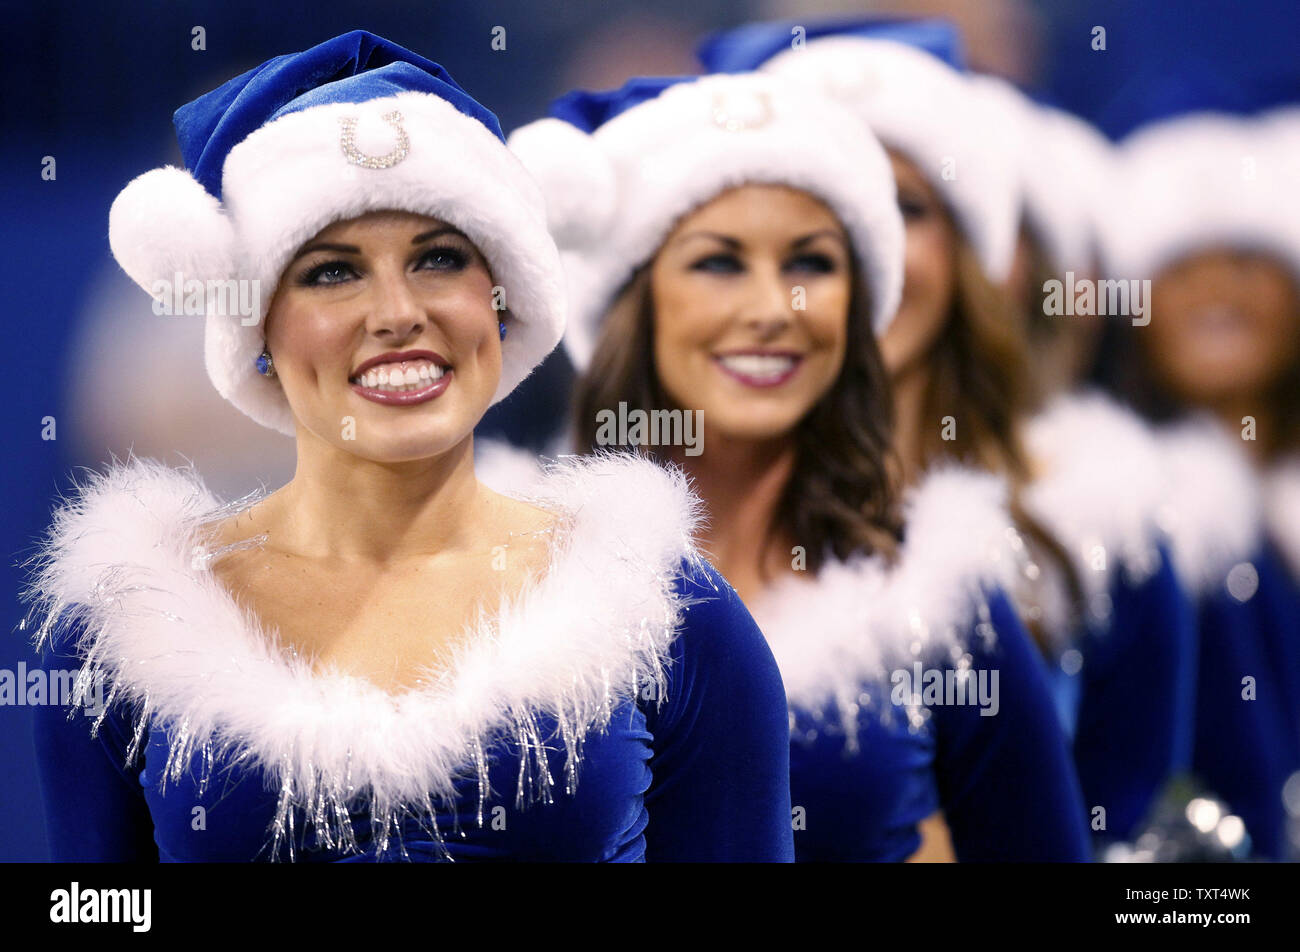 Indianapolis Colts cheerleader Megan M., who shaved her head in support of  head coach Chuck Pagano who is suffering from leukimia, leads the the squad  in Christmas attire during their game against